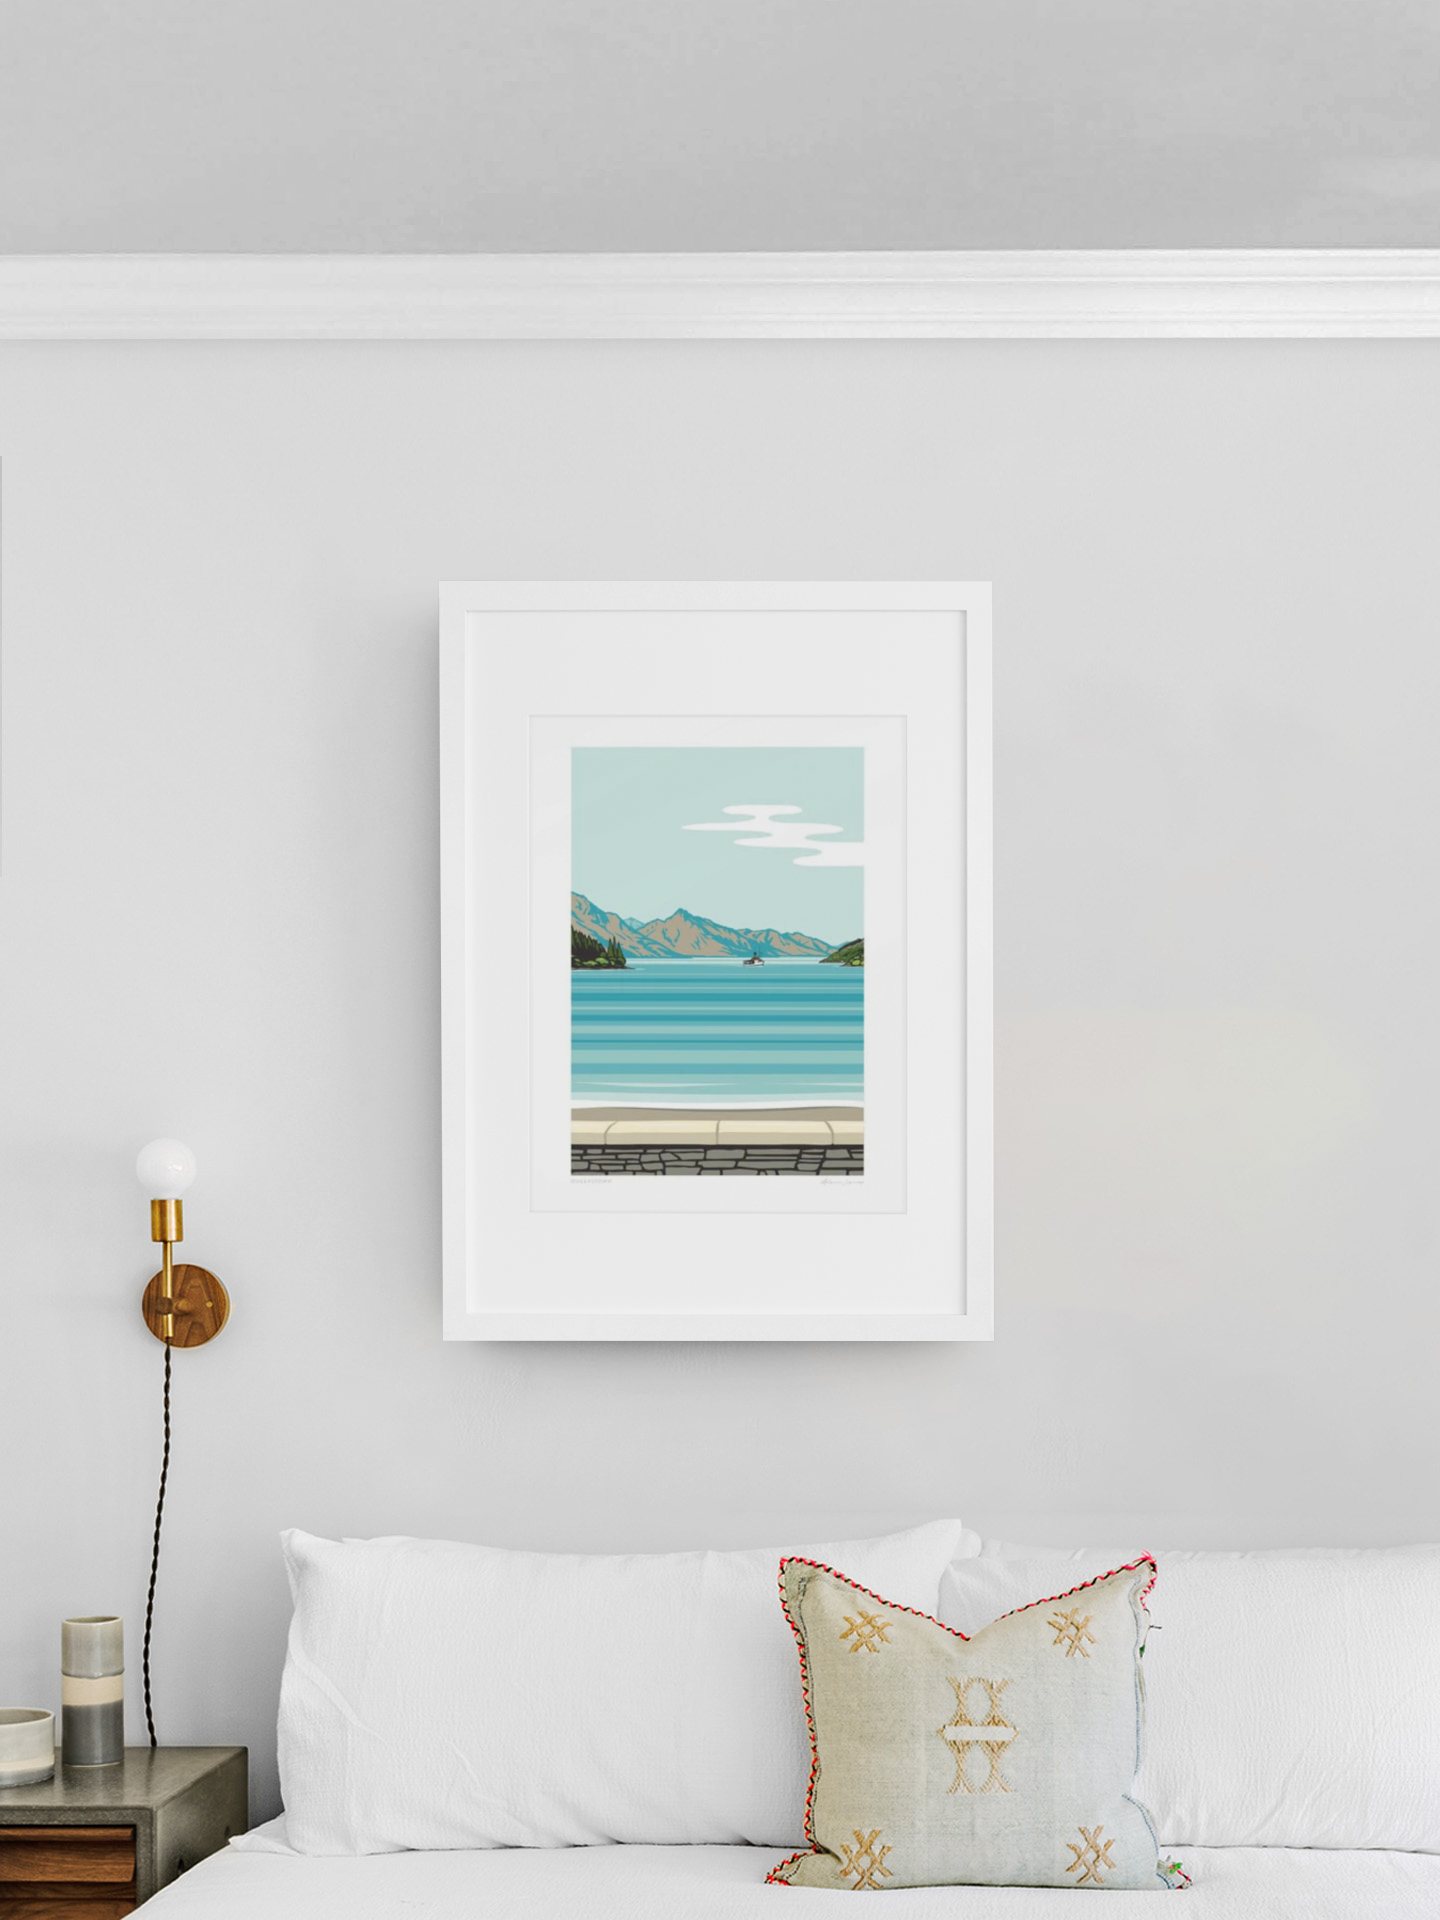 A tranquil landscape painting from Glenn Jones' Queenstown Series, featuring a serene Lake Earnslaw and mountains near Queenstown, hangs elegantly on a clean, white wall, adding a touch of calm.